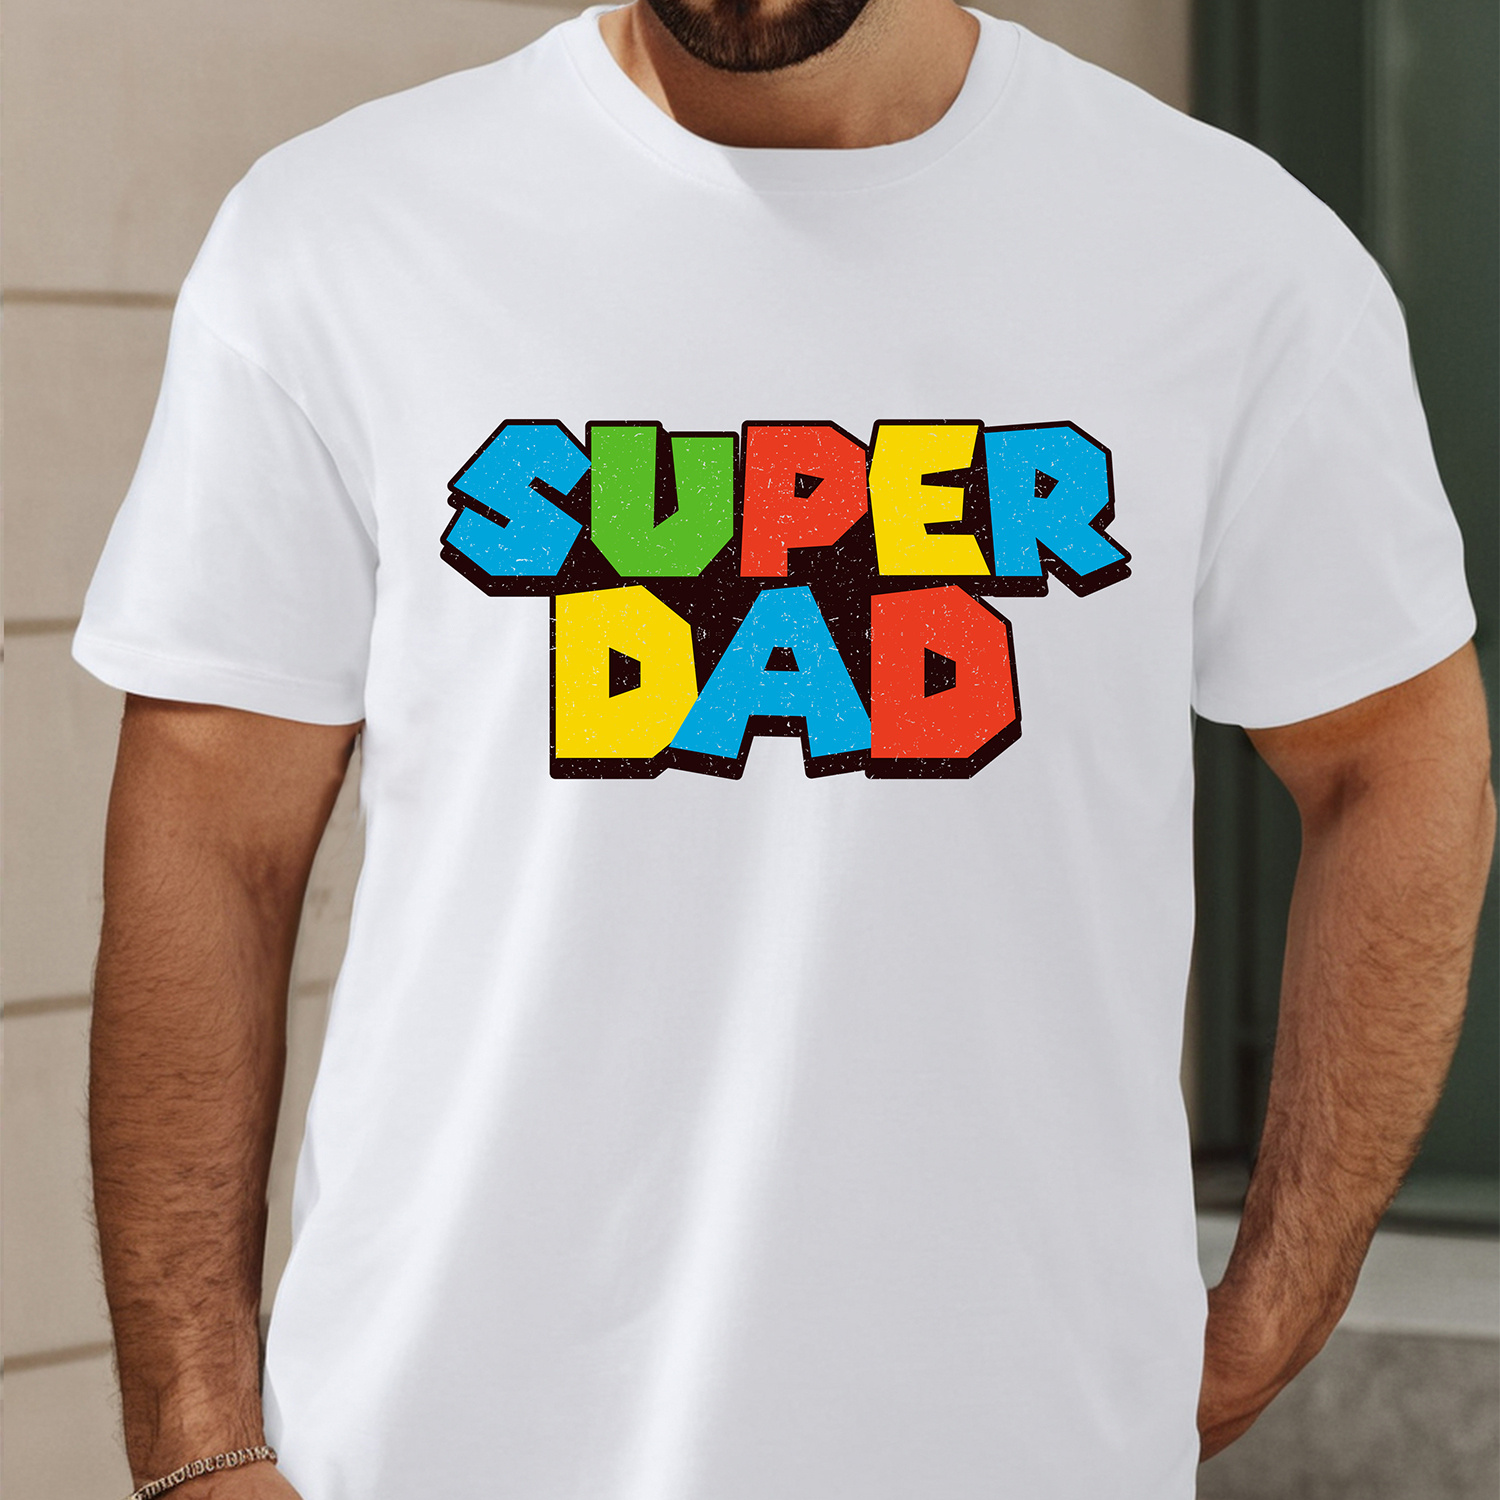 

Super Dad Print, Men's Round Crew Neck Short Sleeve, Simple Style Tee Fashion Regular Fit T-shirt, Casual Comfy Breathable Top For Spring Summer Holiday Leisure Vacation Men's Clothing As Gift